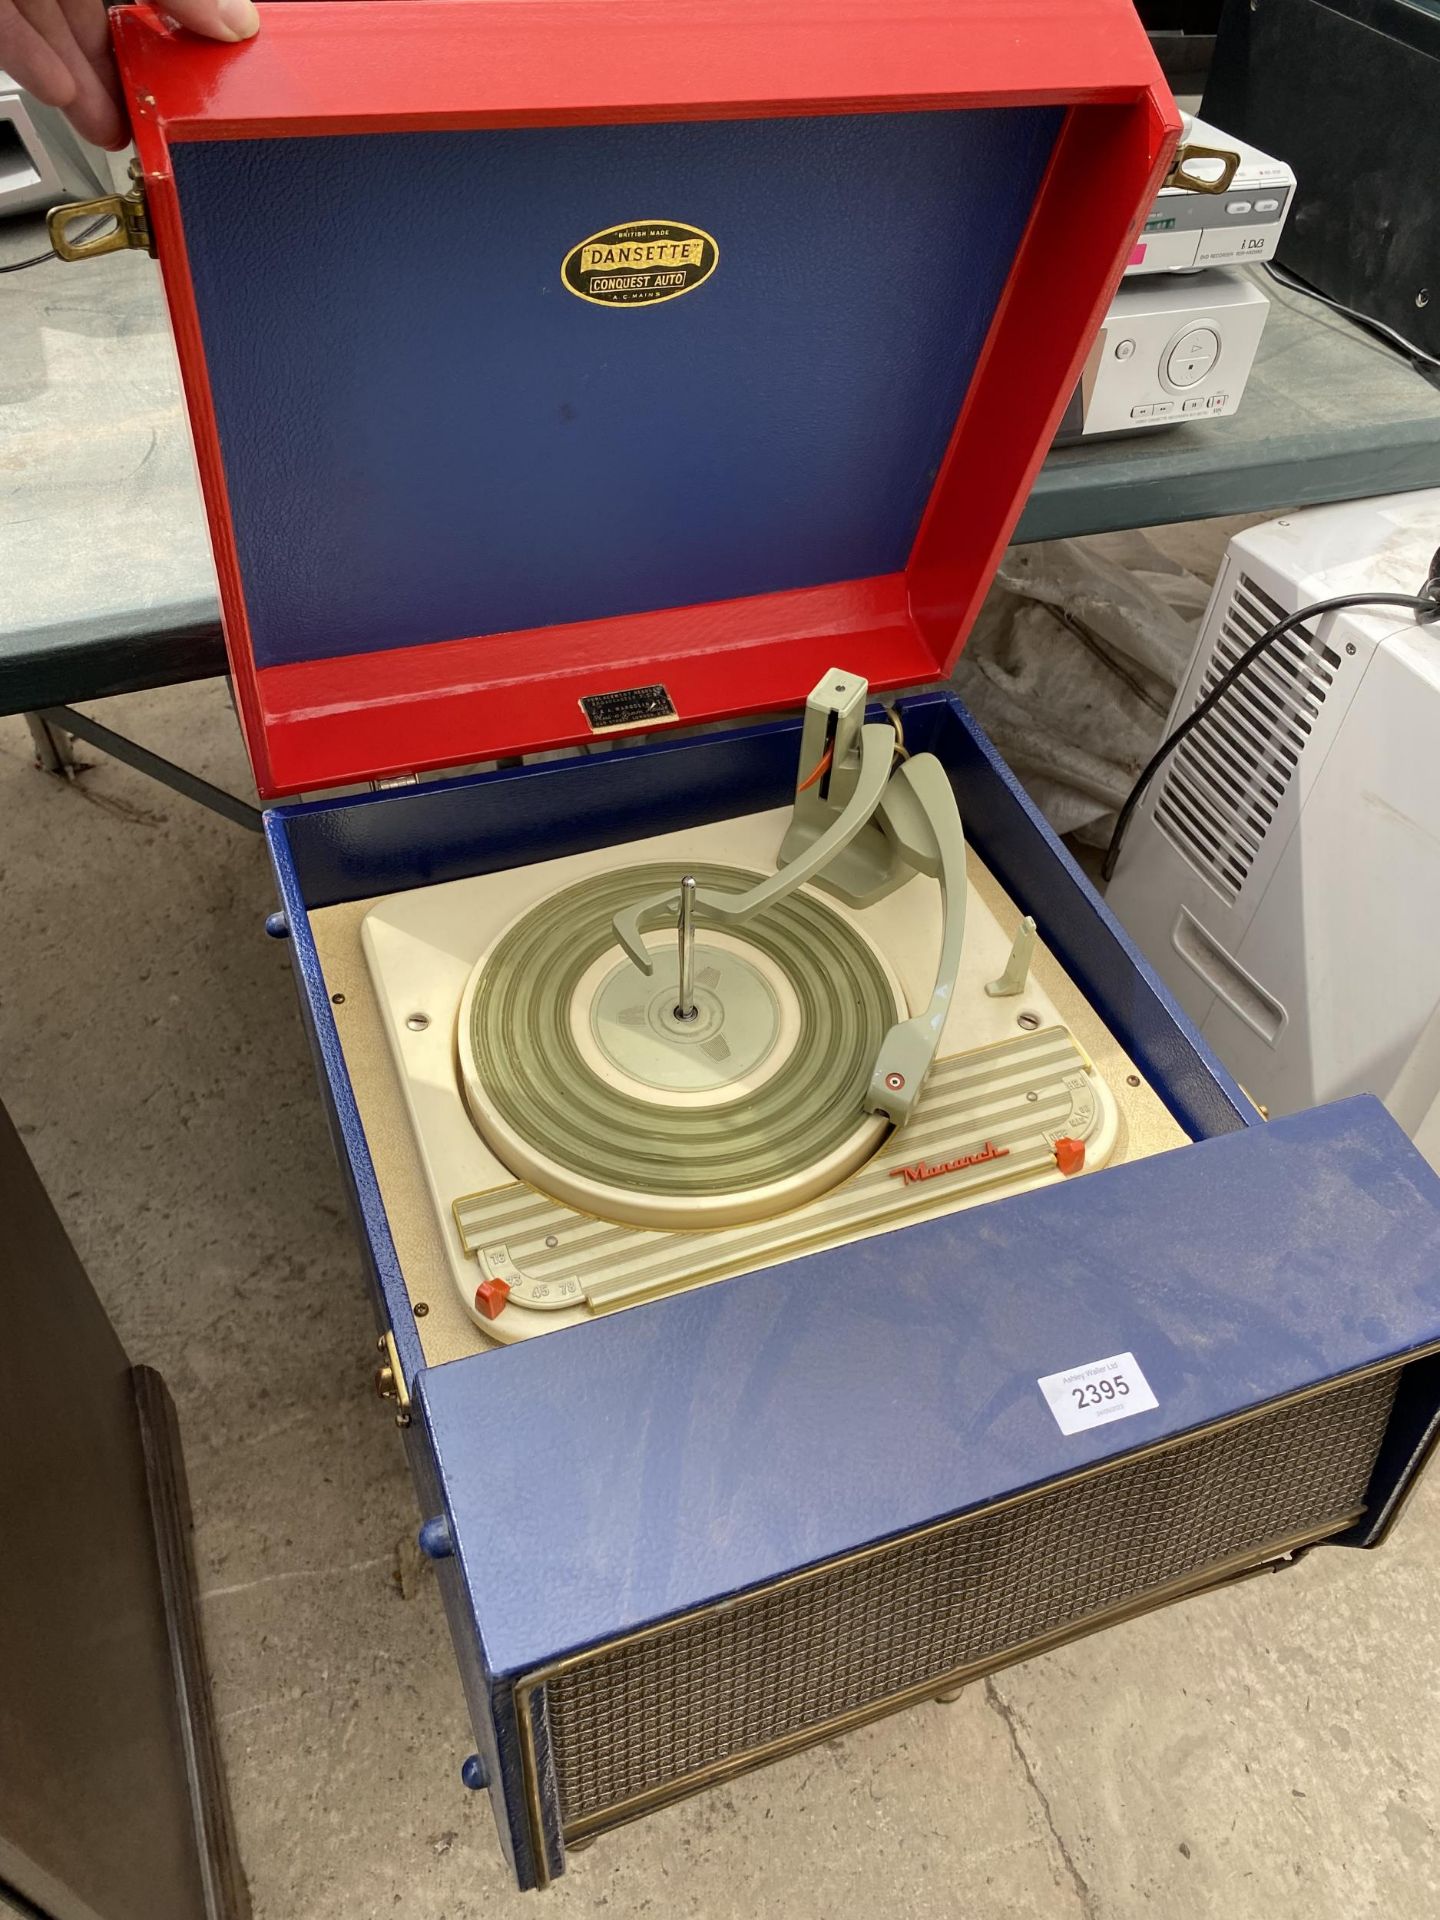 A DANETTE MONARCH RECORD PLAYER ON DANSETTE LEGS - Image 2 of 3